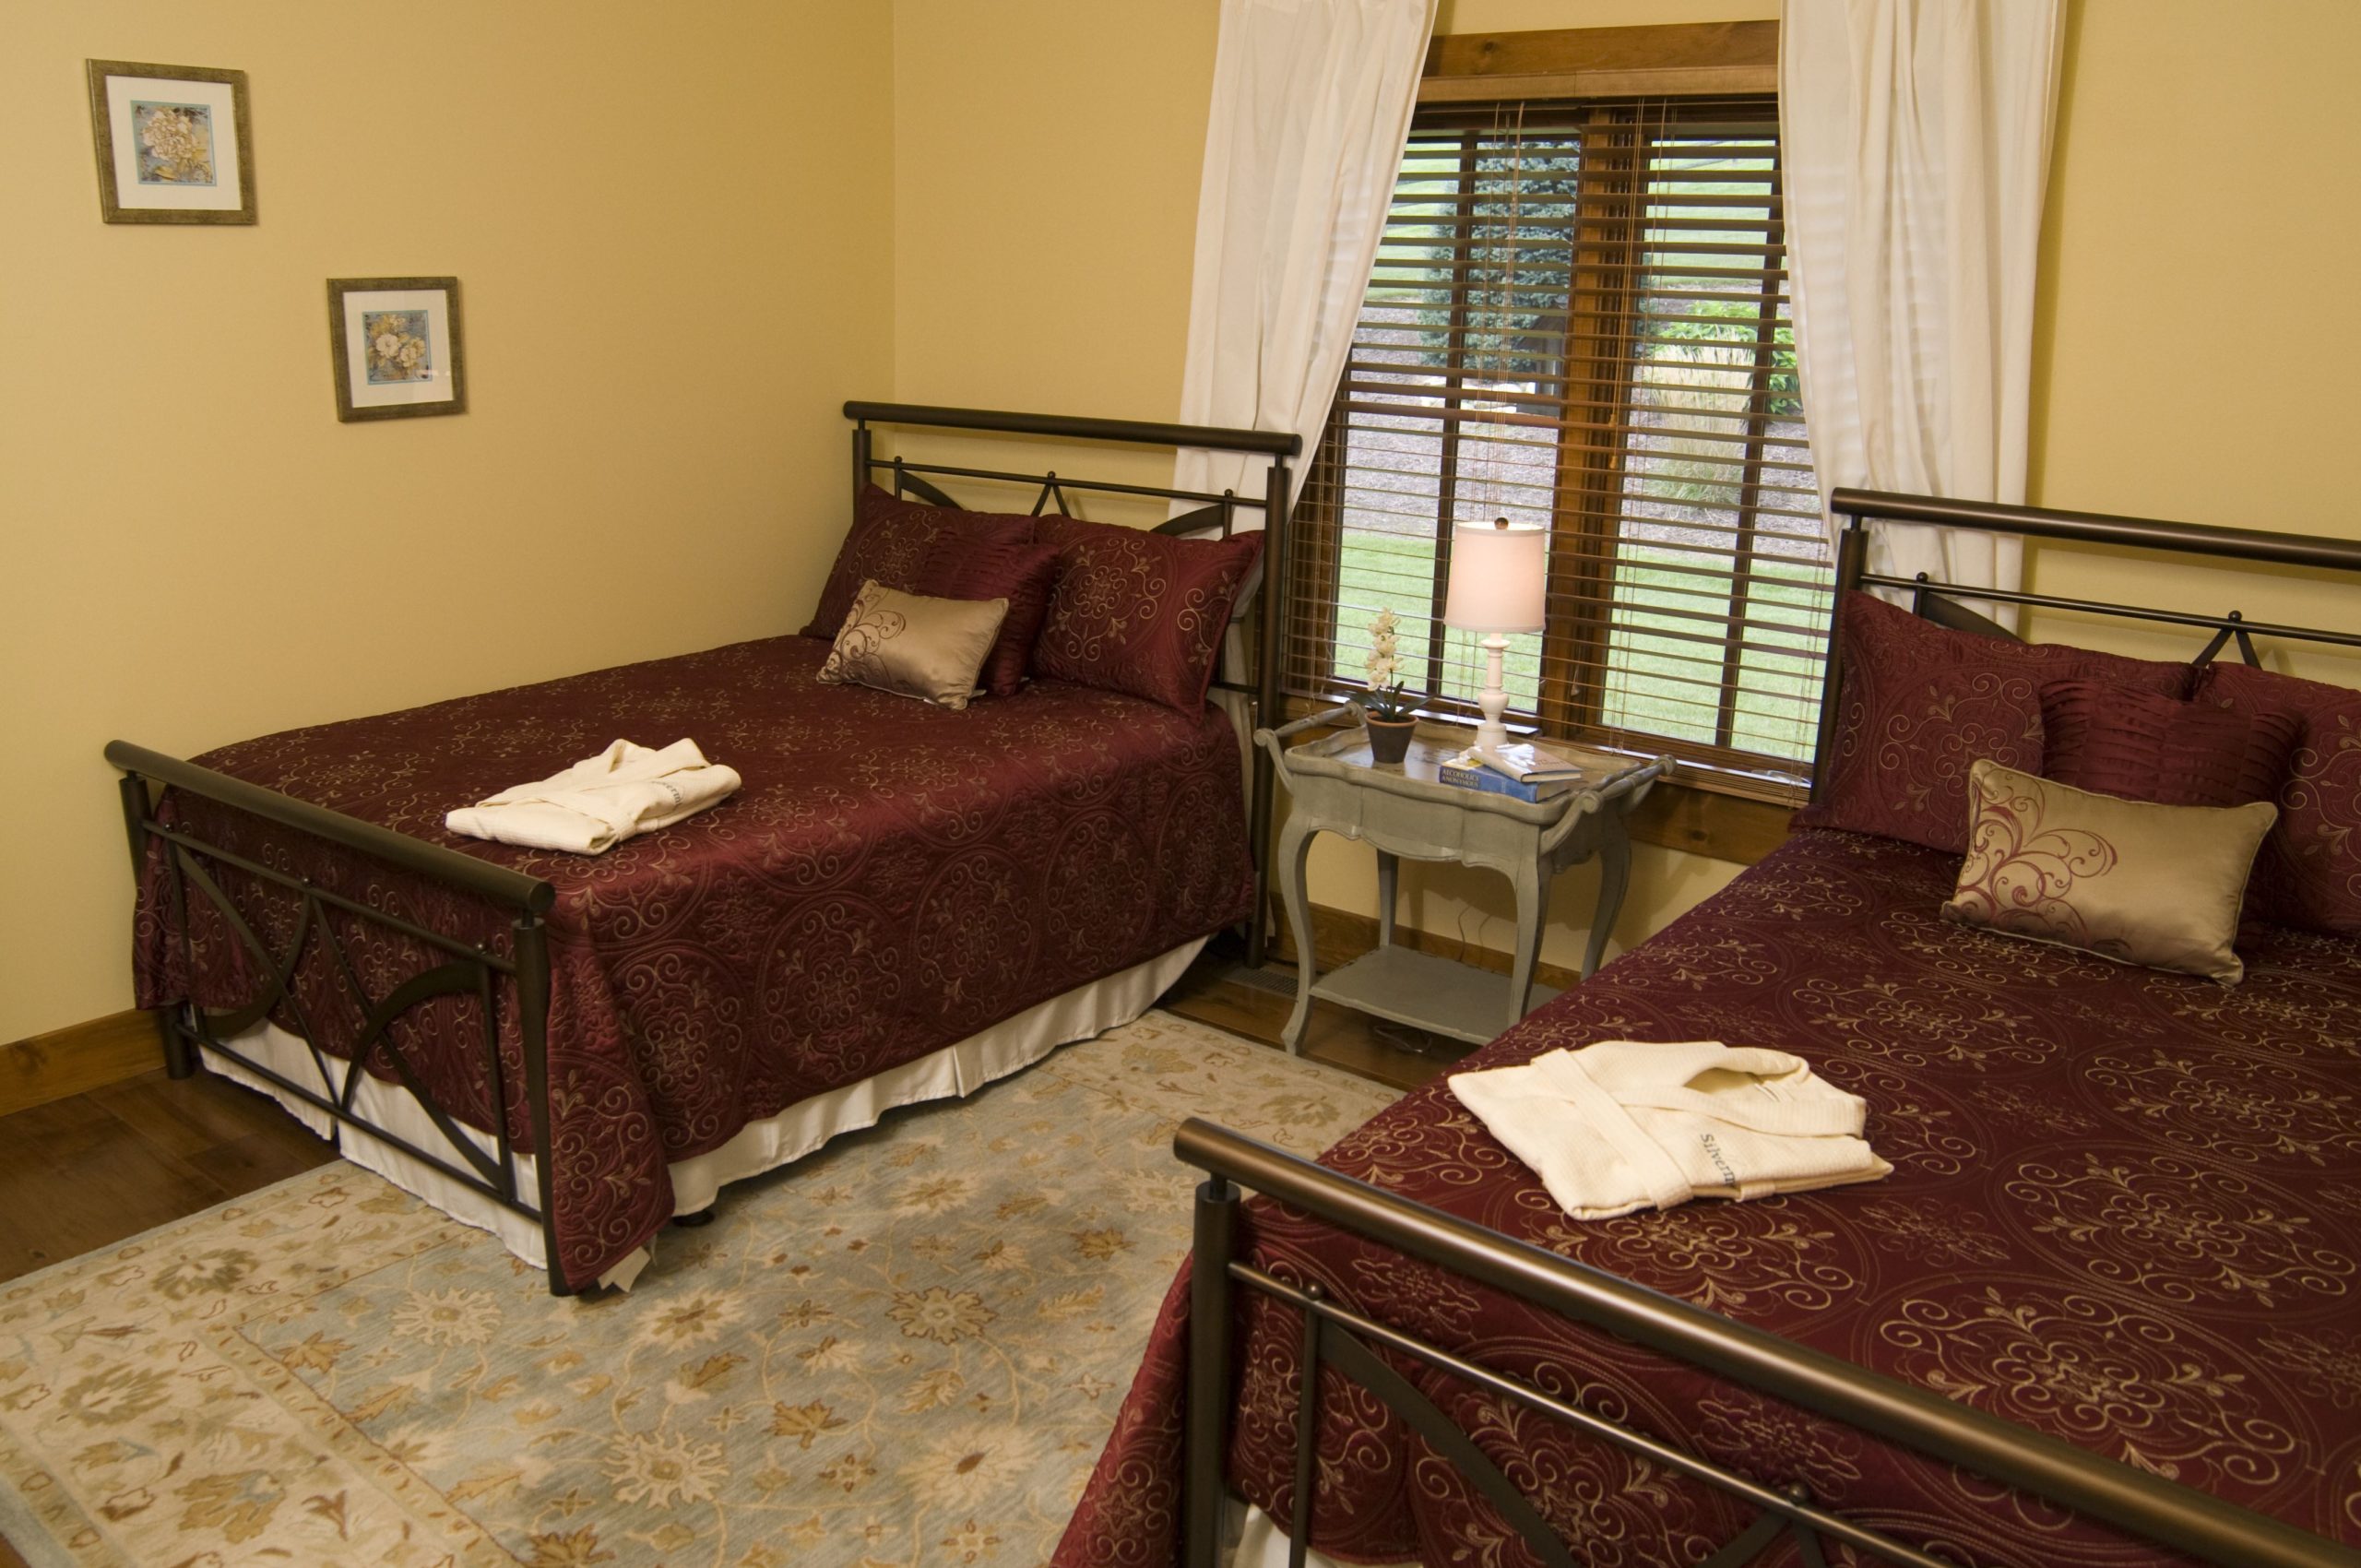 Shared bedroom at Silvermist